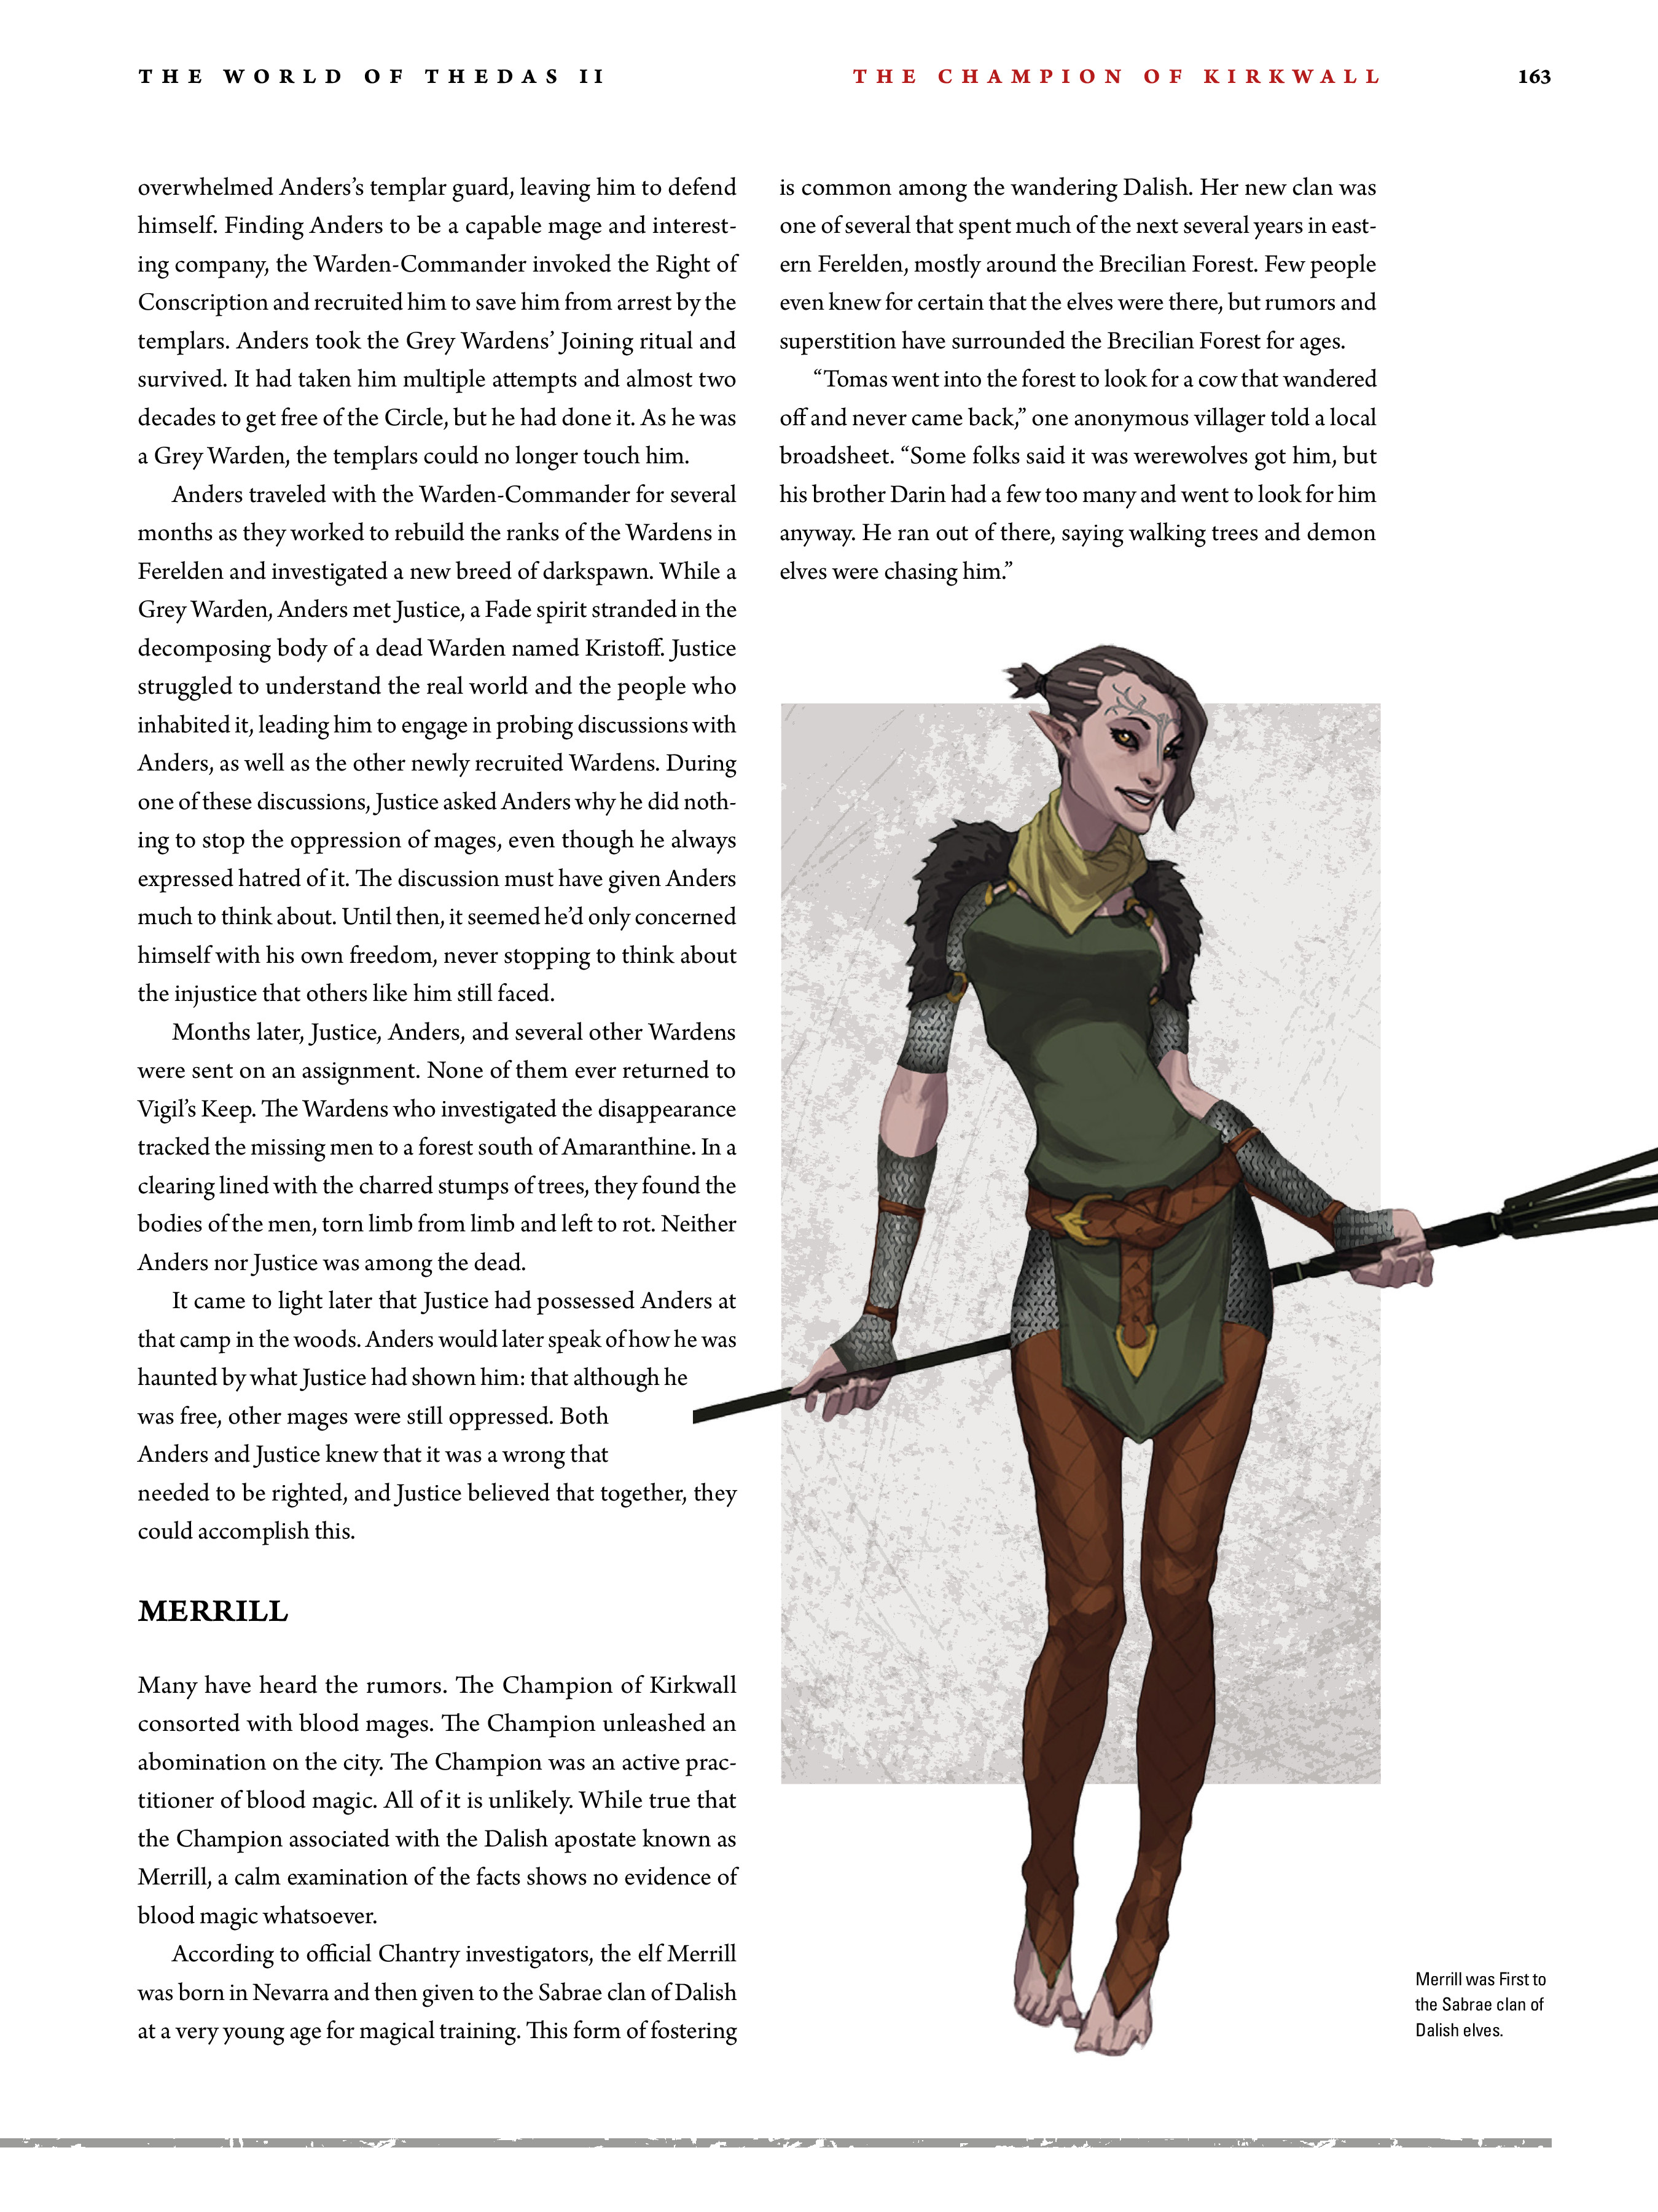 Read online Dragon Age: The World of Thedas comic -  Issue # TPB 2 - 159